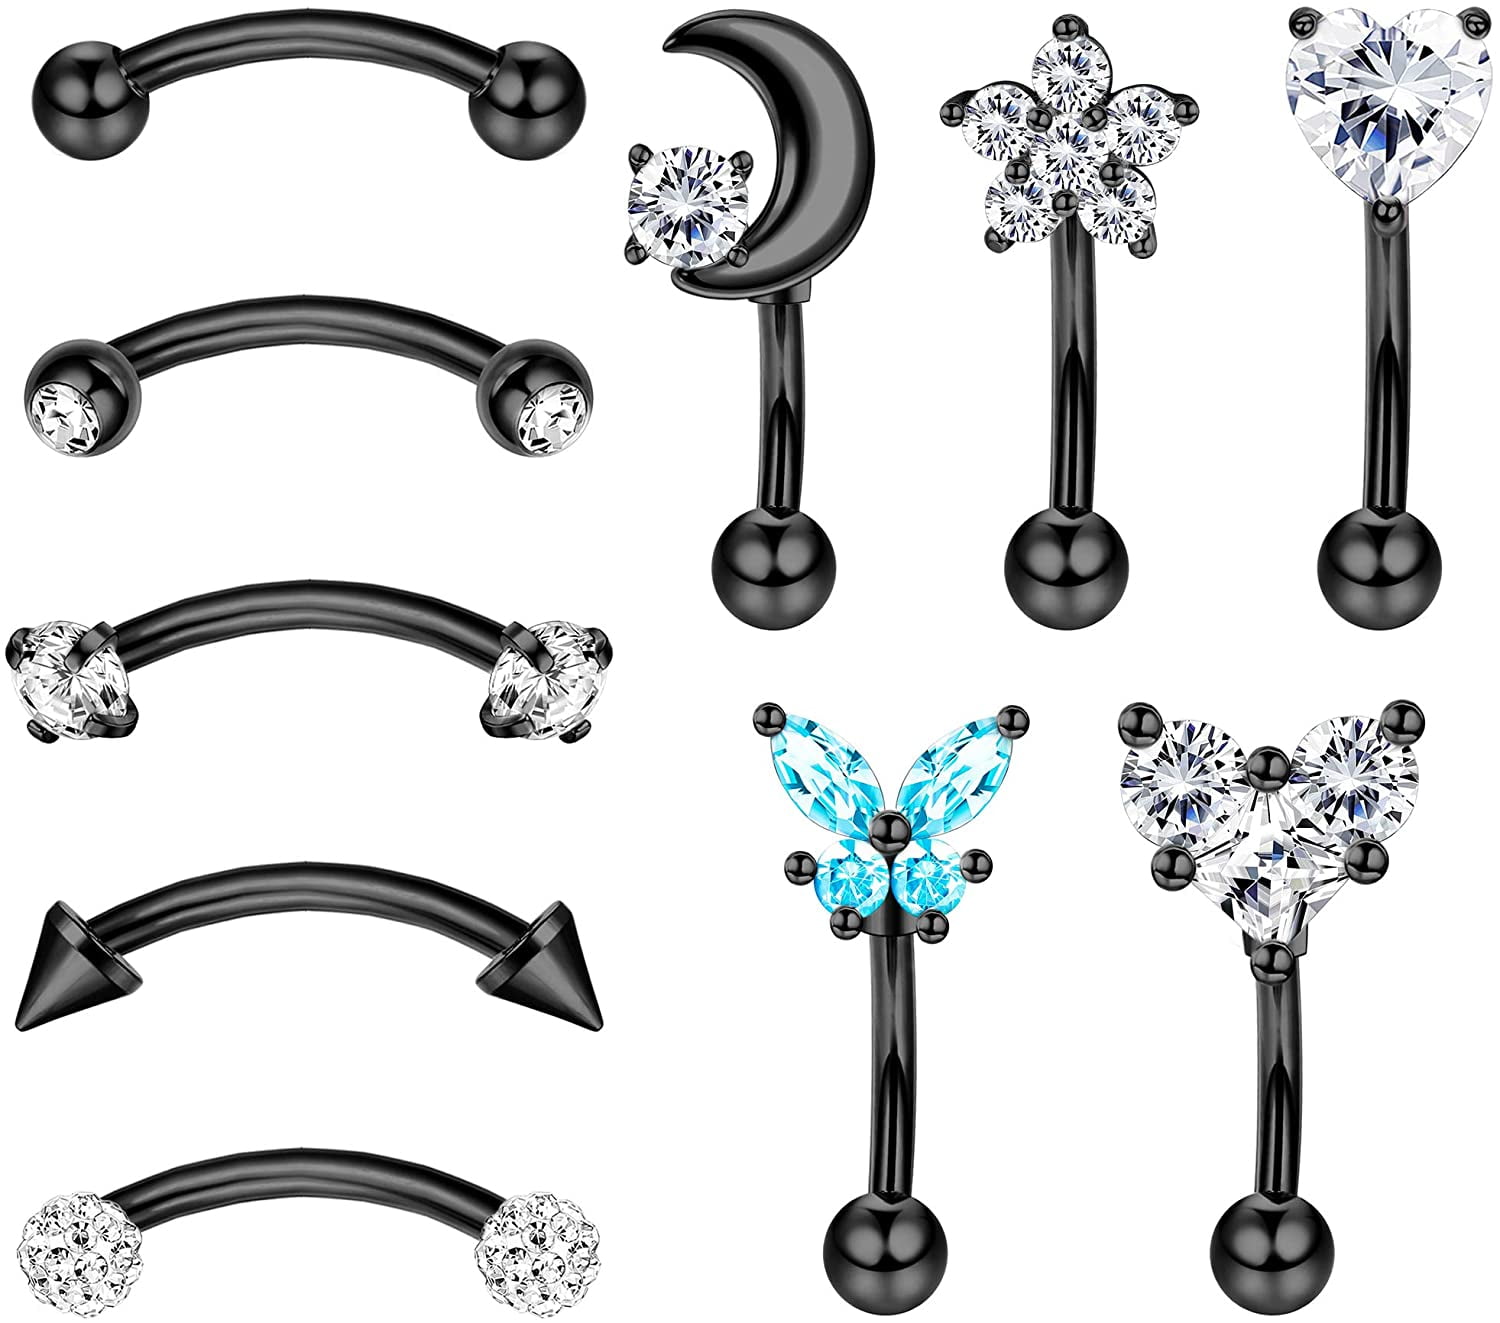 Briana Williams 4Pcs 16G Rook Earrings Surgical Steel Moon Shaped Closure Ring Segment Clicker Ring with Zircon Curved Bar Barbell Daith Conch Cartilage Earrings Eyebrow Rings Piercing Jewelry 